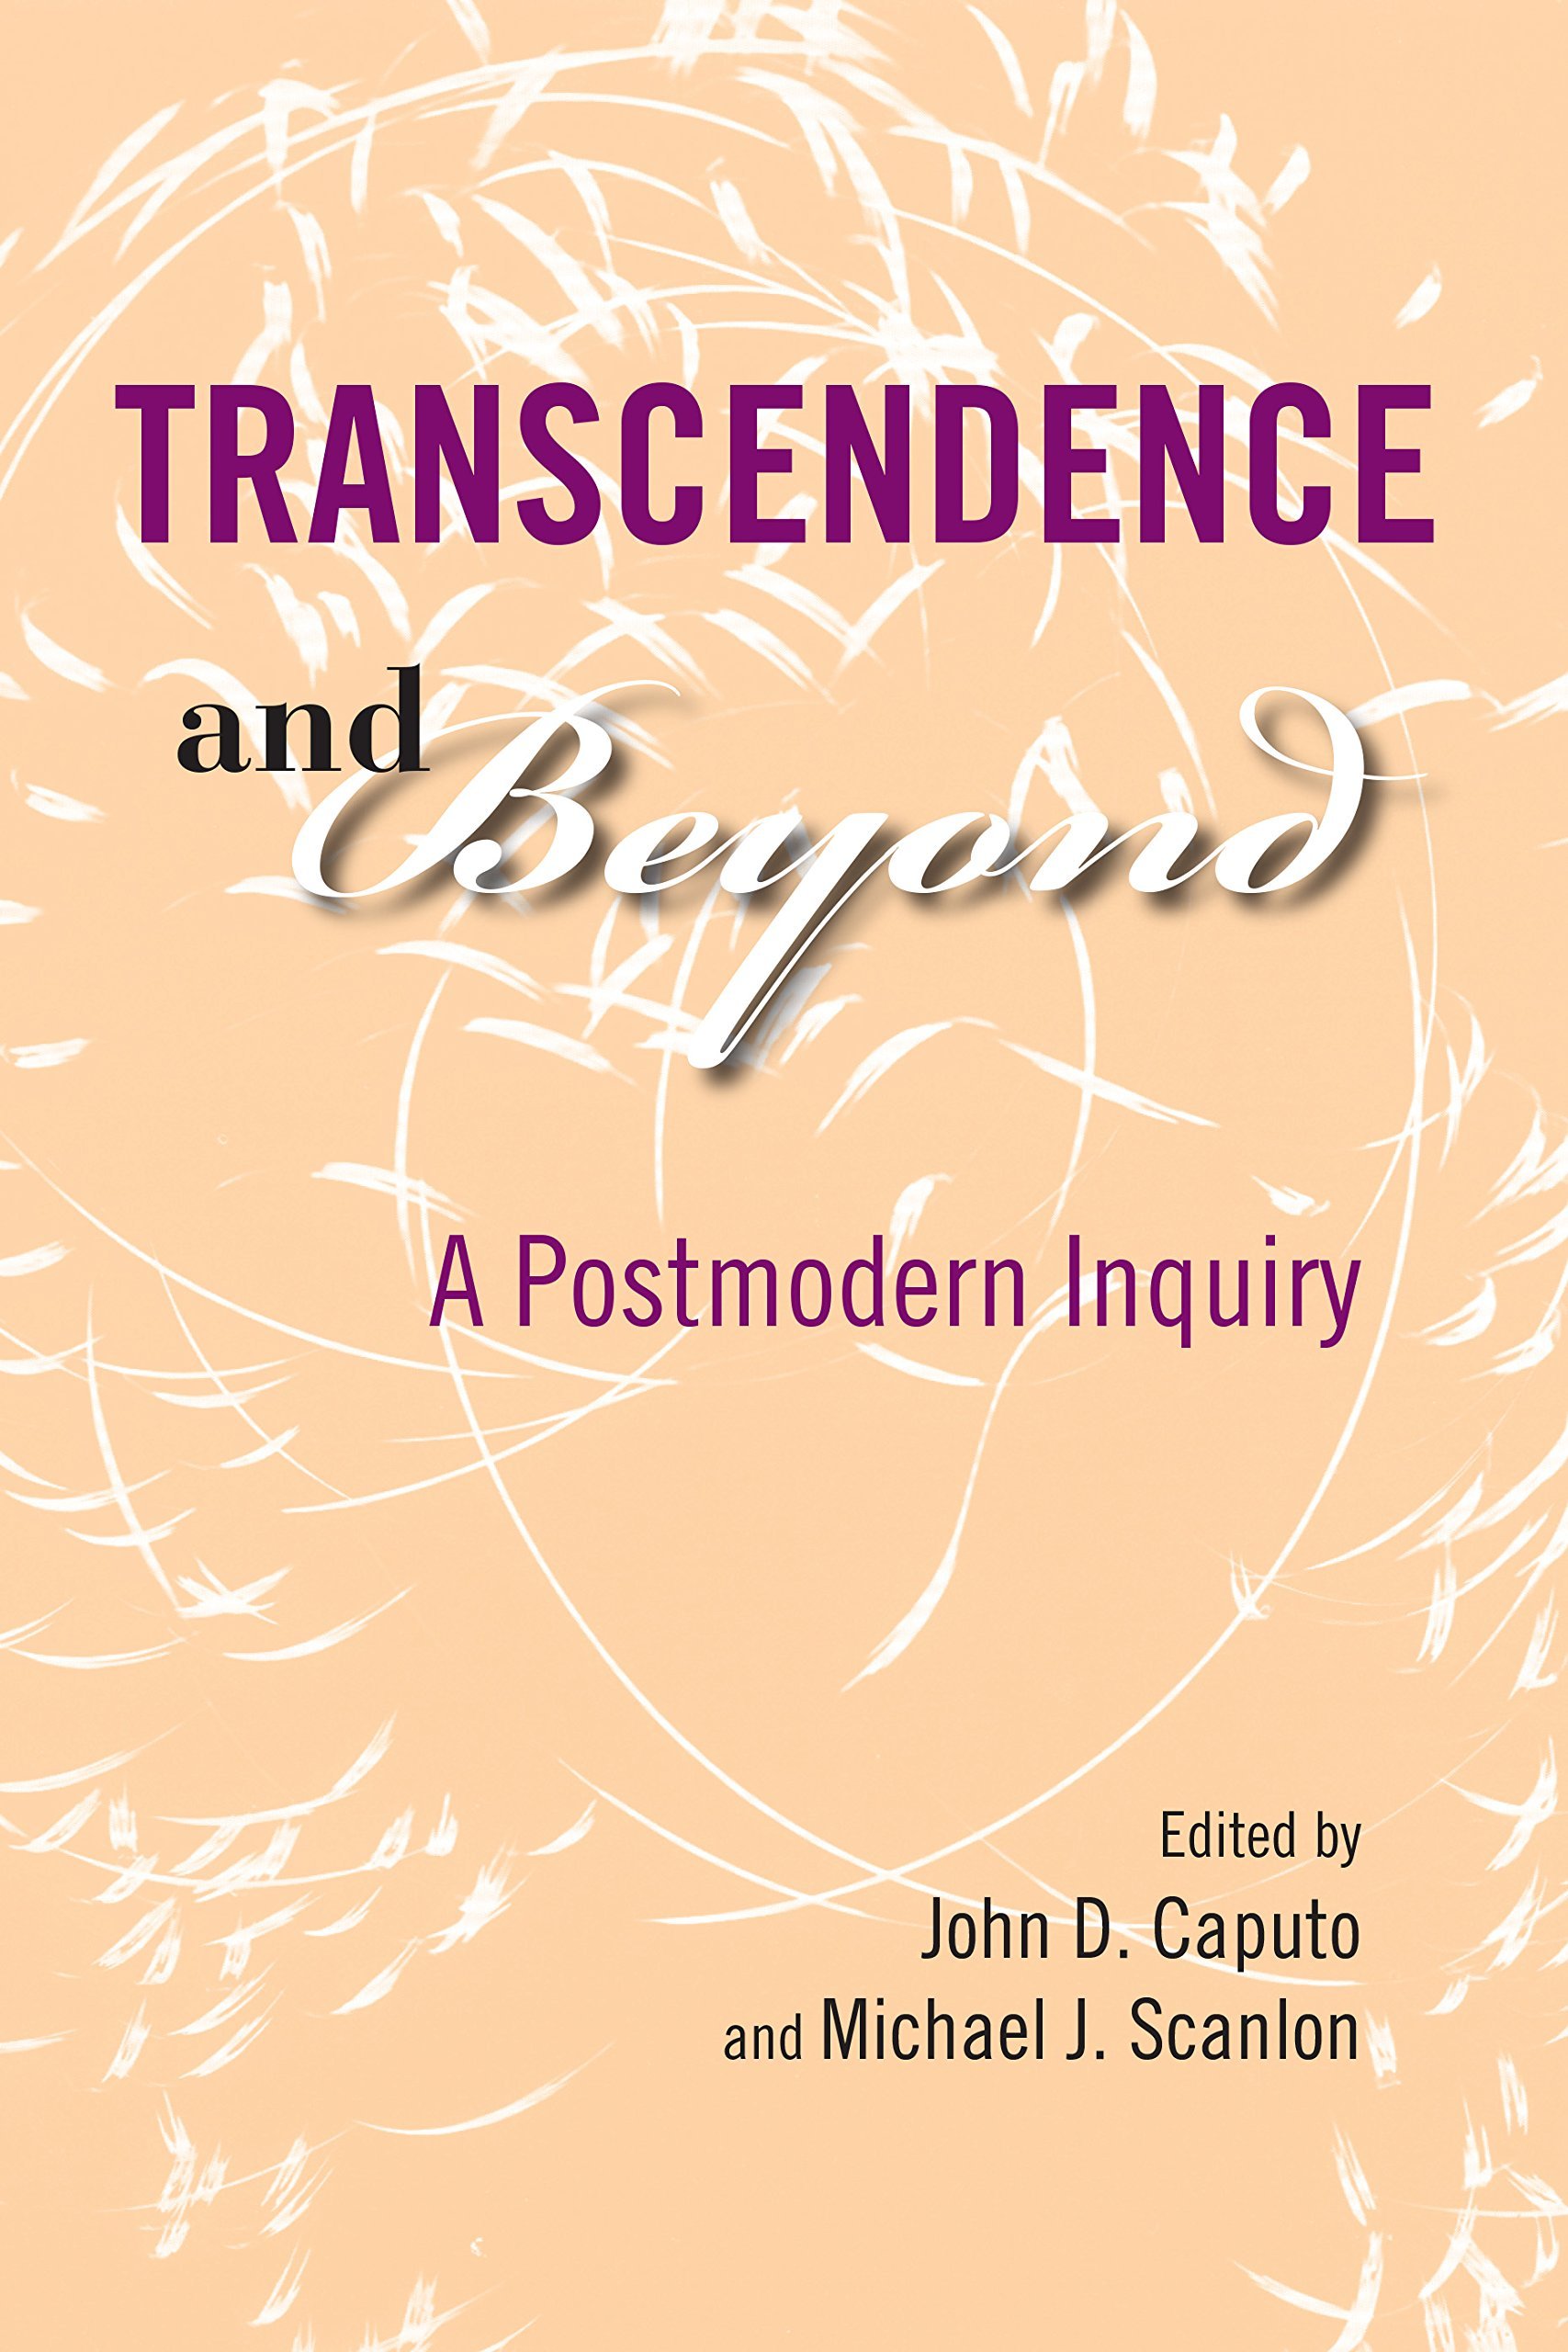 Transcendence and Beyond: A Postmodern Inquiry